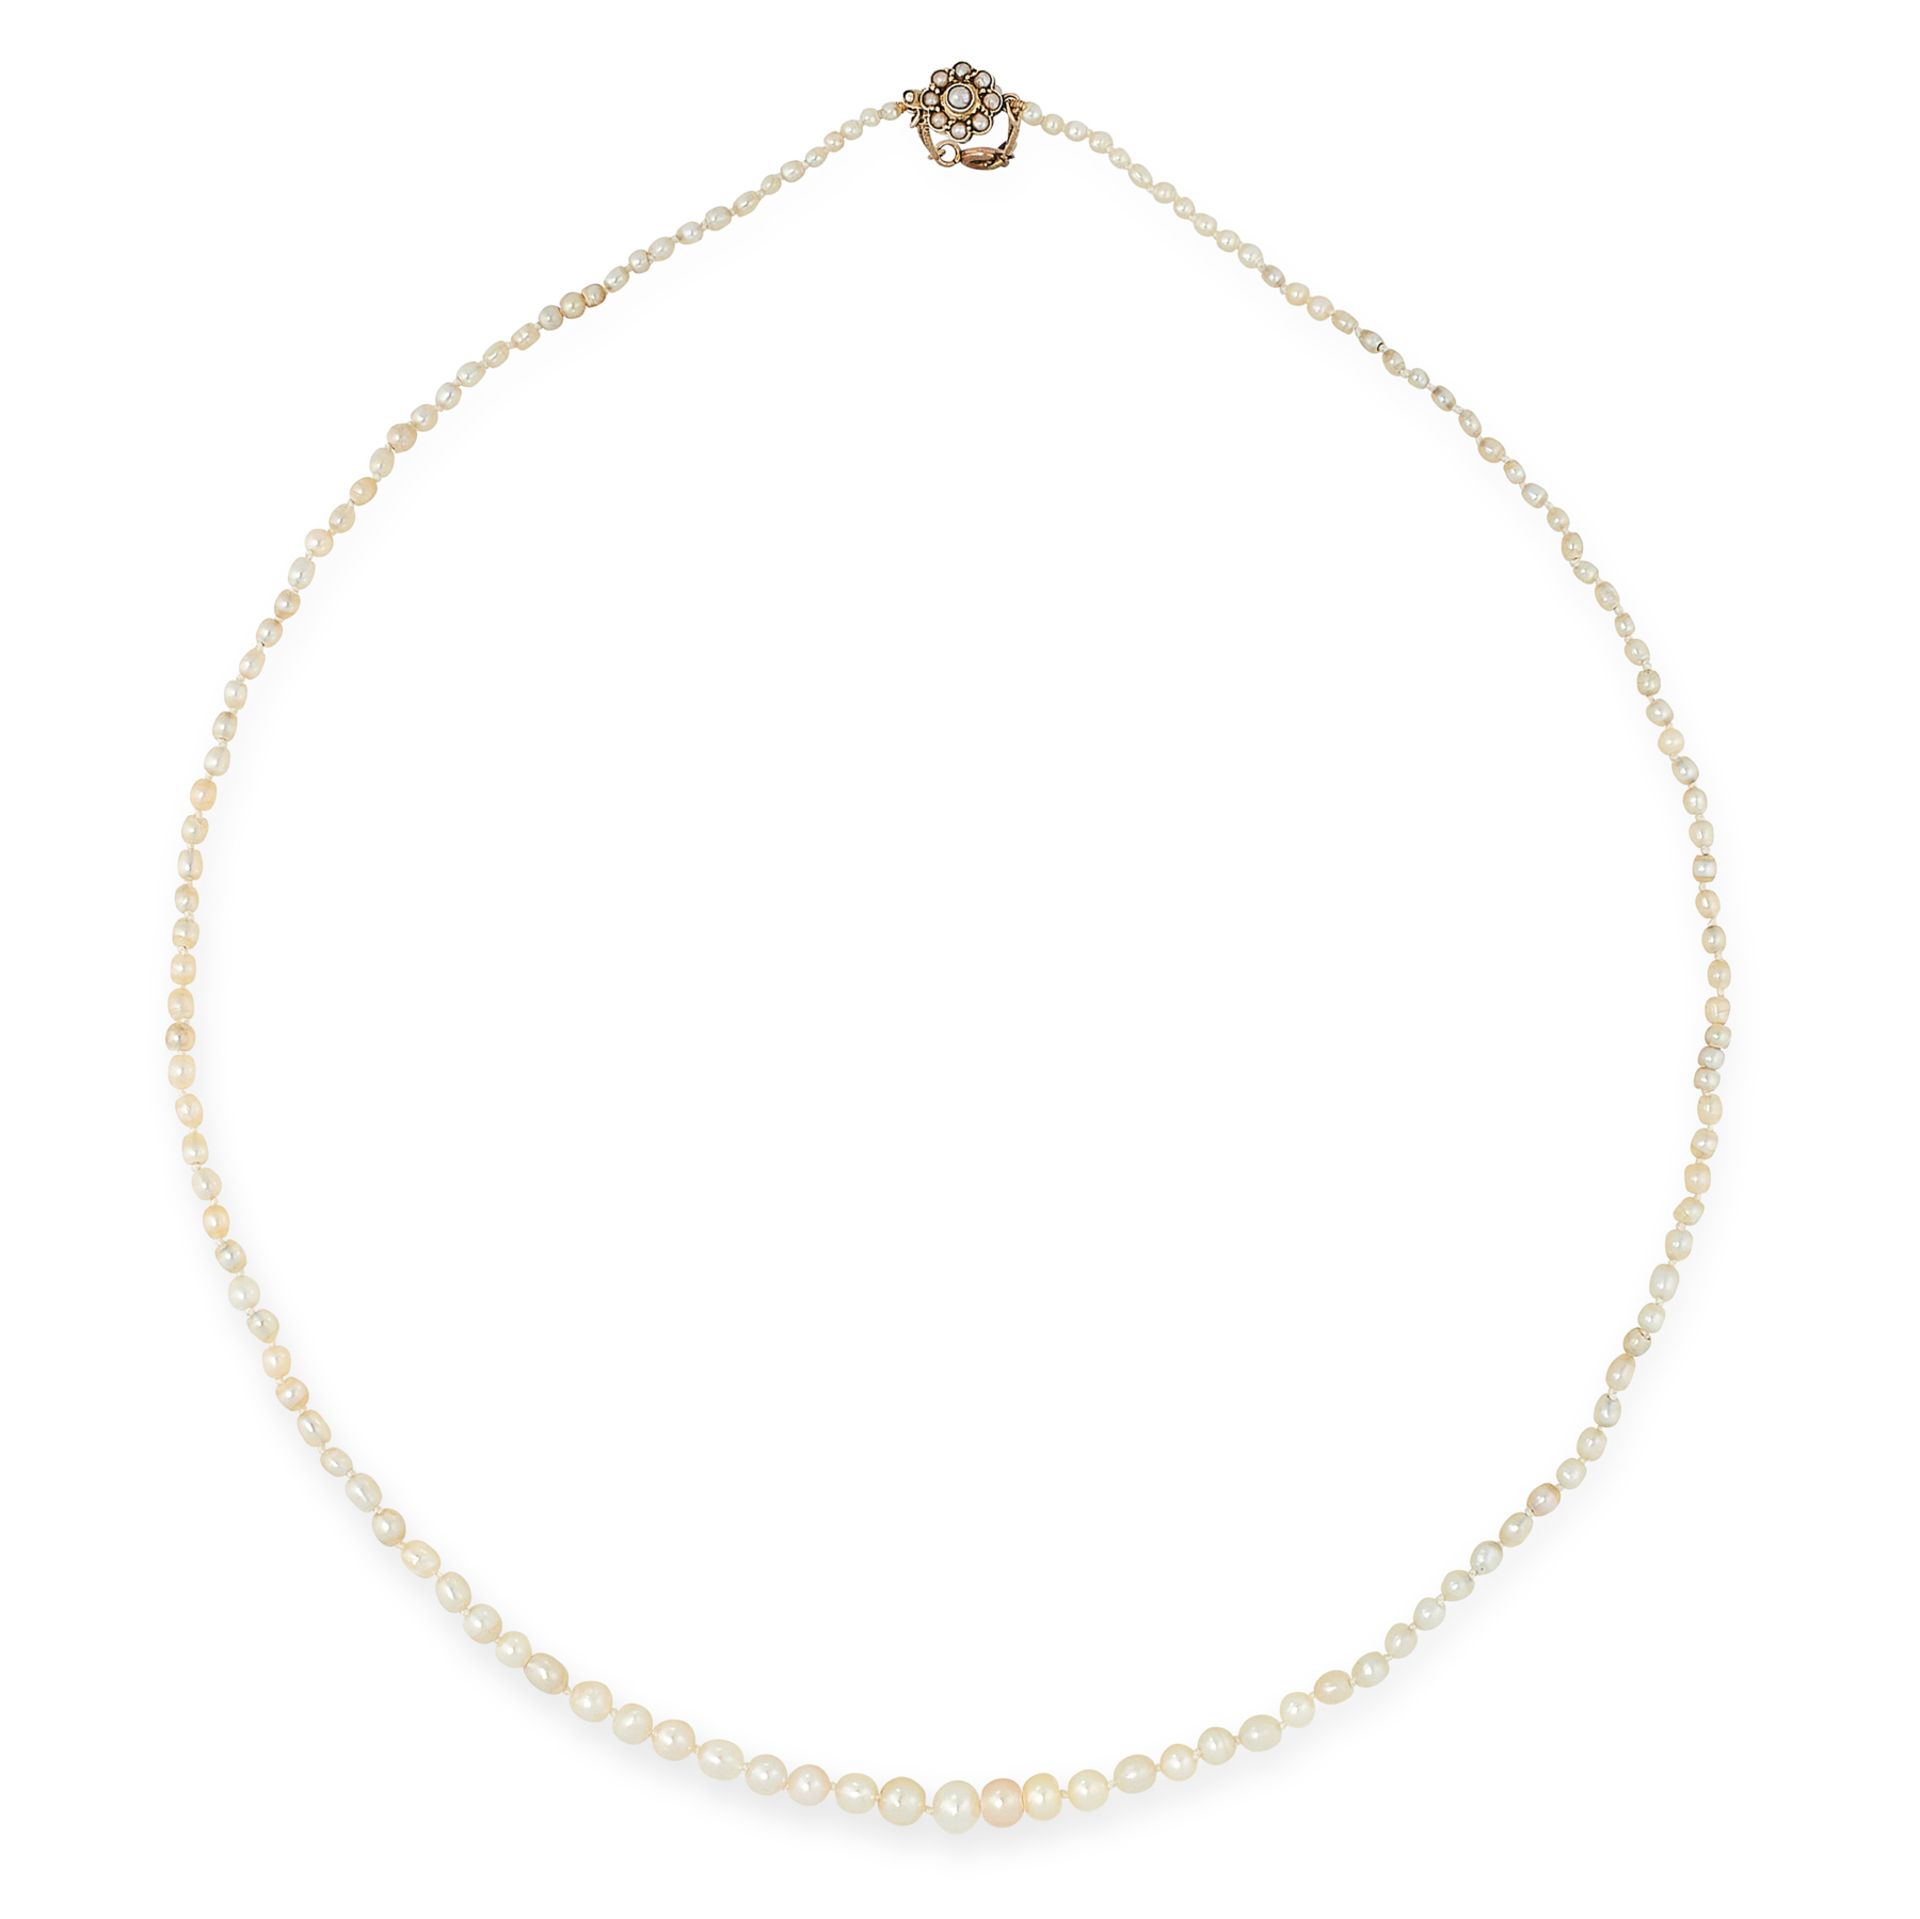 A NATURAL PEARL NECKLACE in yellow gold, comprising a single row of one hundred and forty pearls